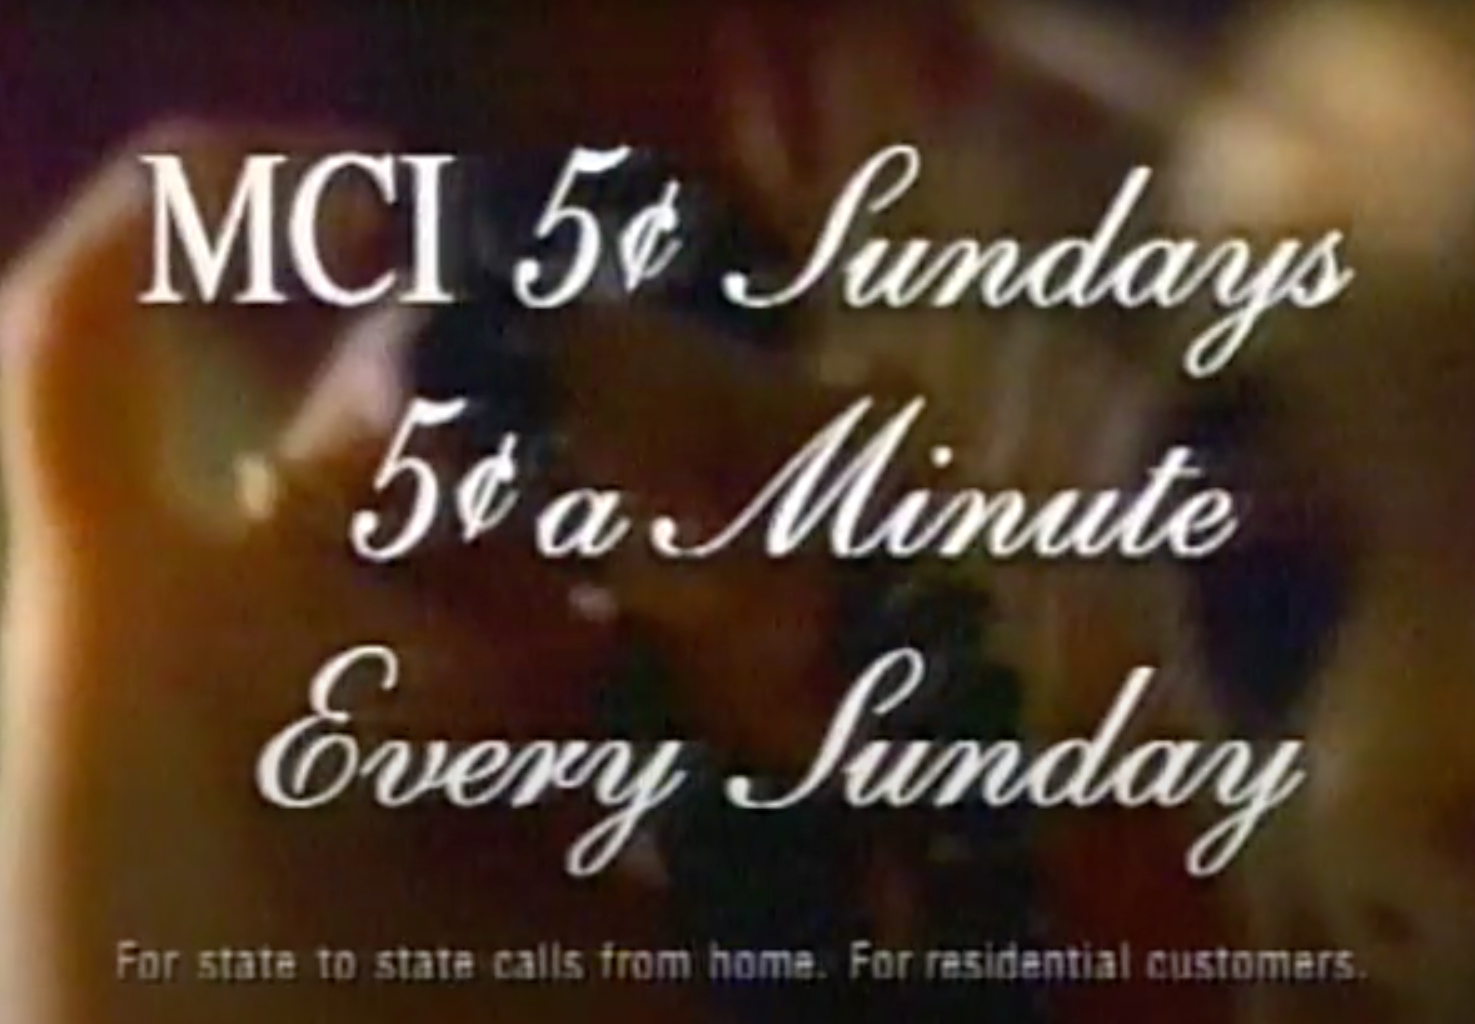 MCI advertisement promoting 5¢ a minute rate every Sunday for state-to-state calls from home for residential customers